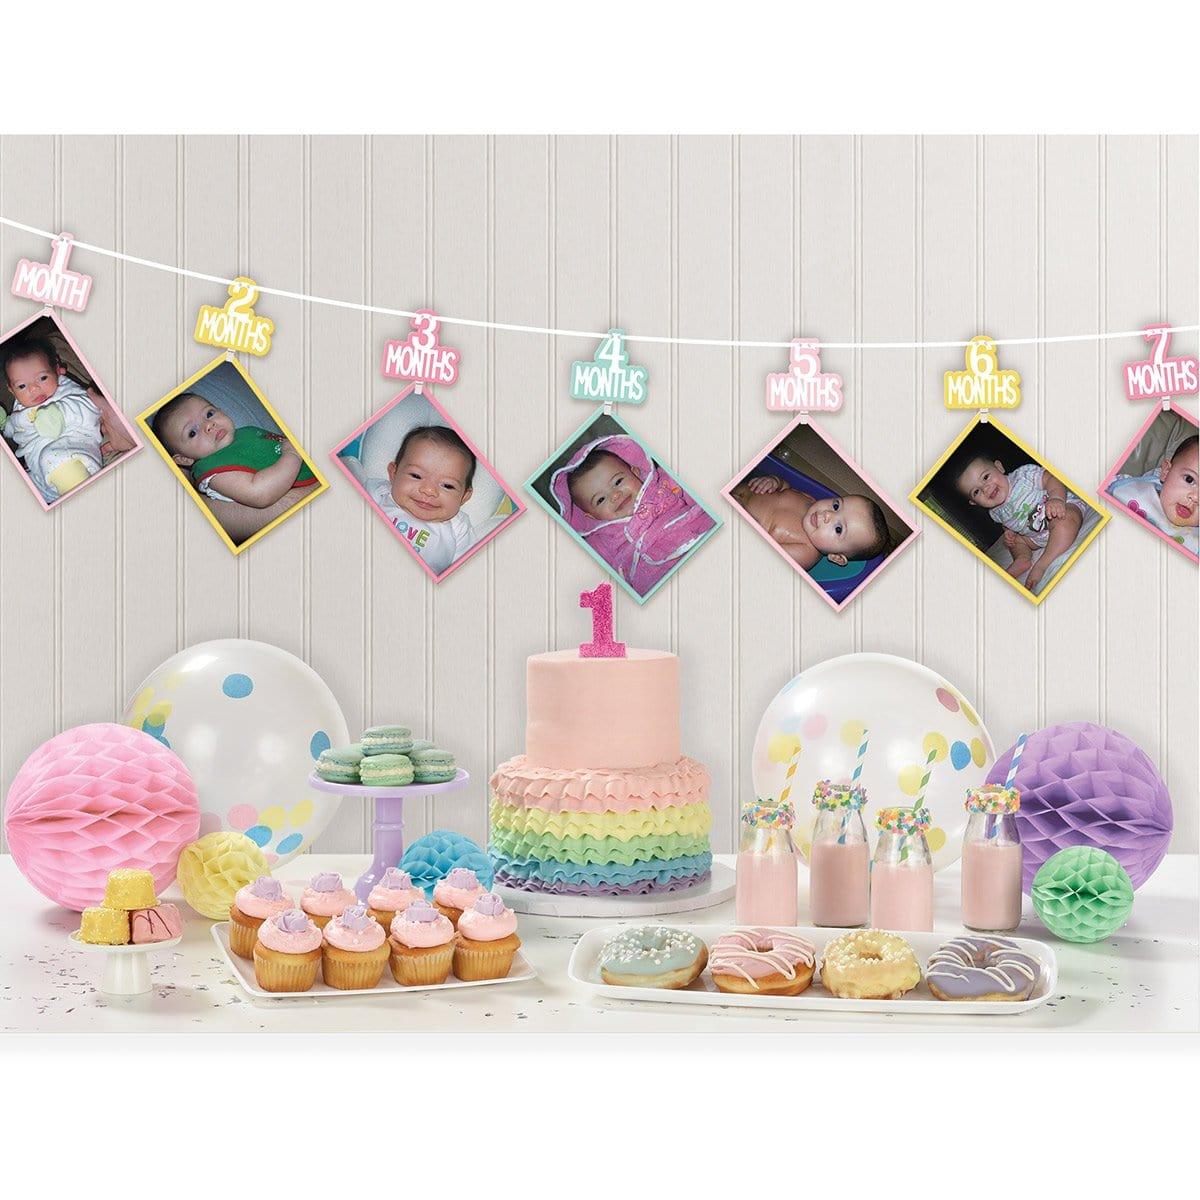 Buy 1st Birthday Pink Photo Garland sold at Party Expert